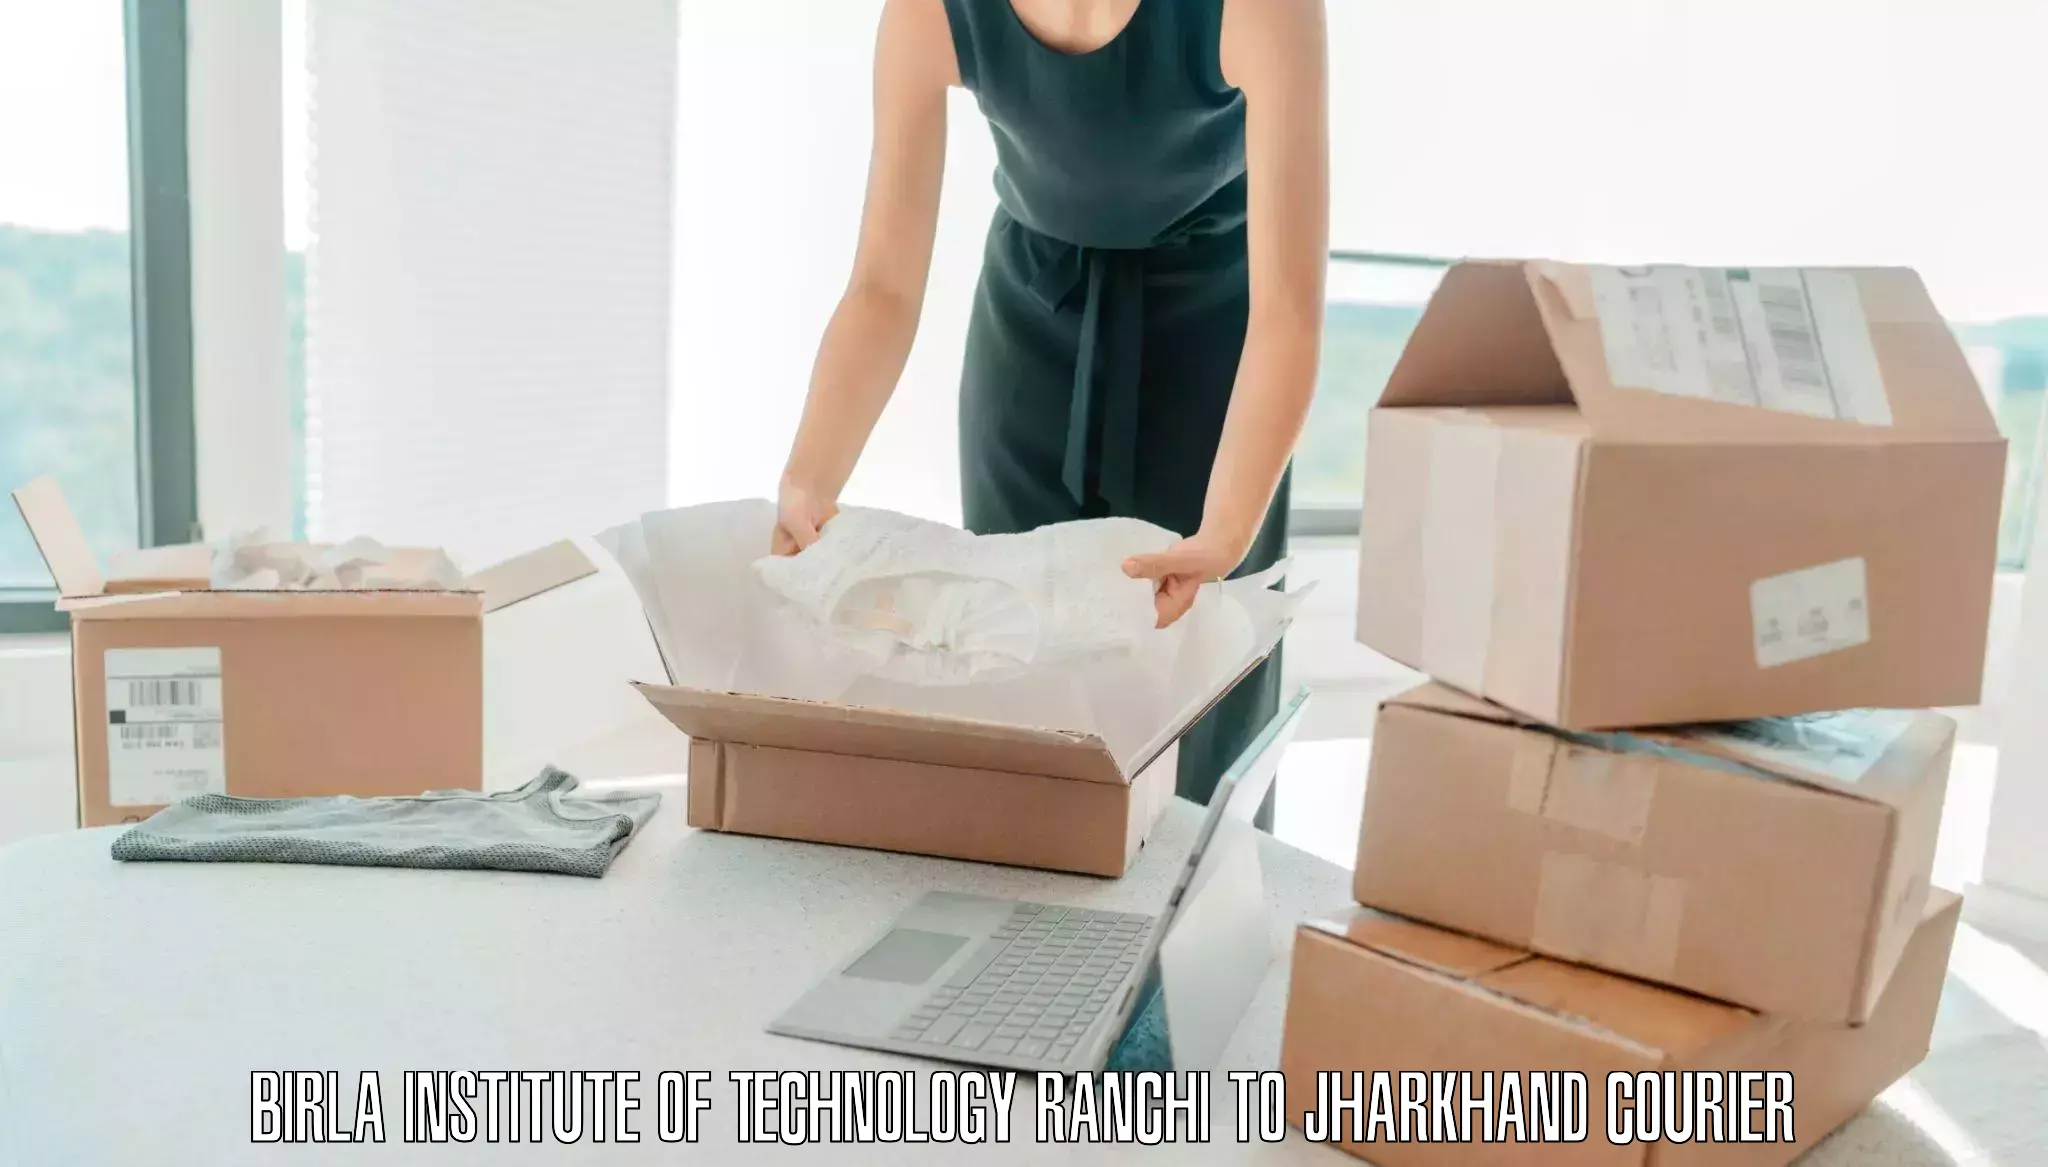 Hassle-free luggage shipping in Birla Institute of Technology Ranchi to Bokaro Steel City